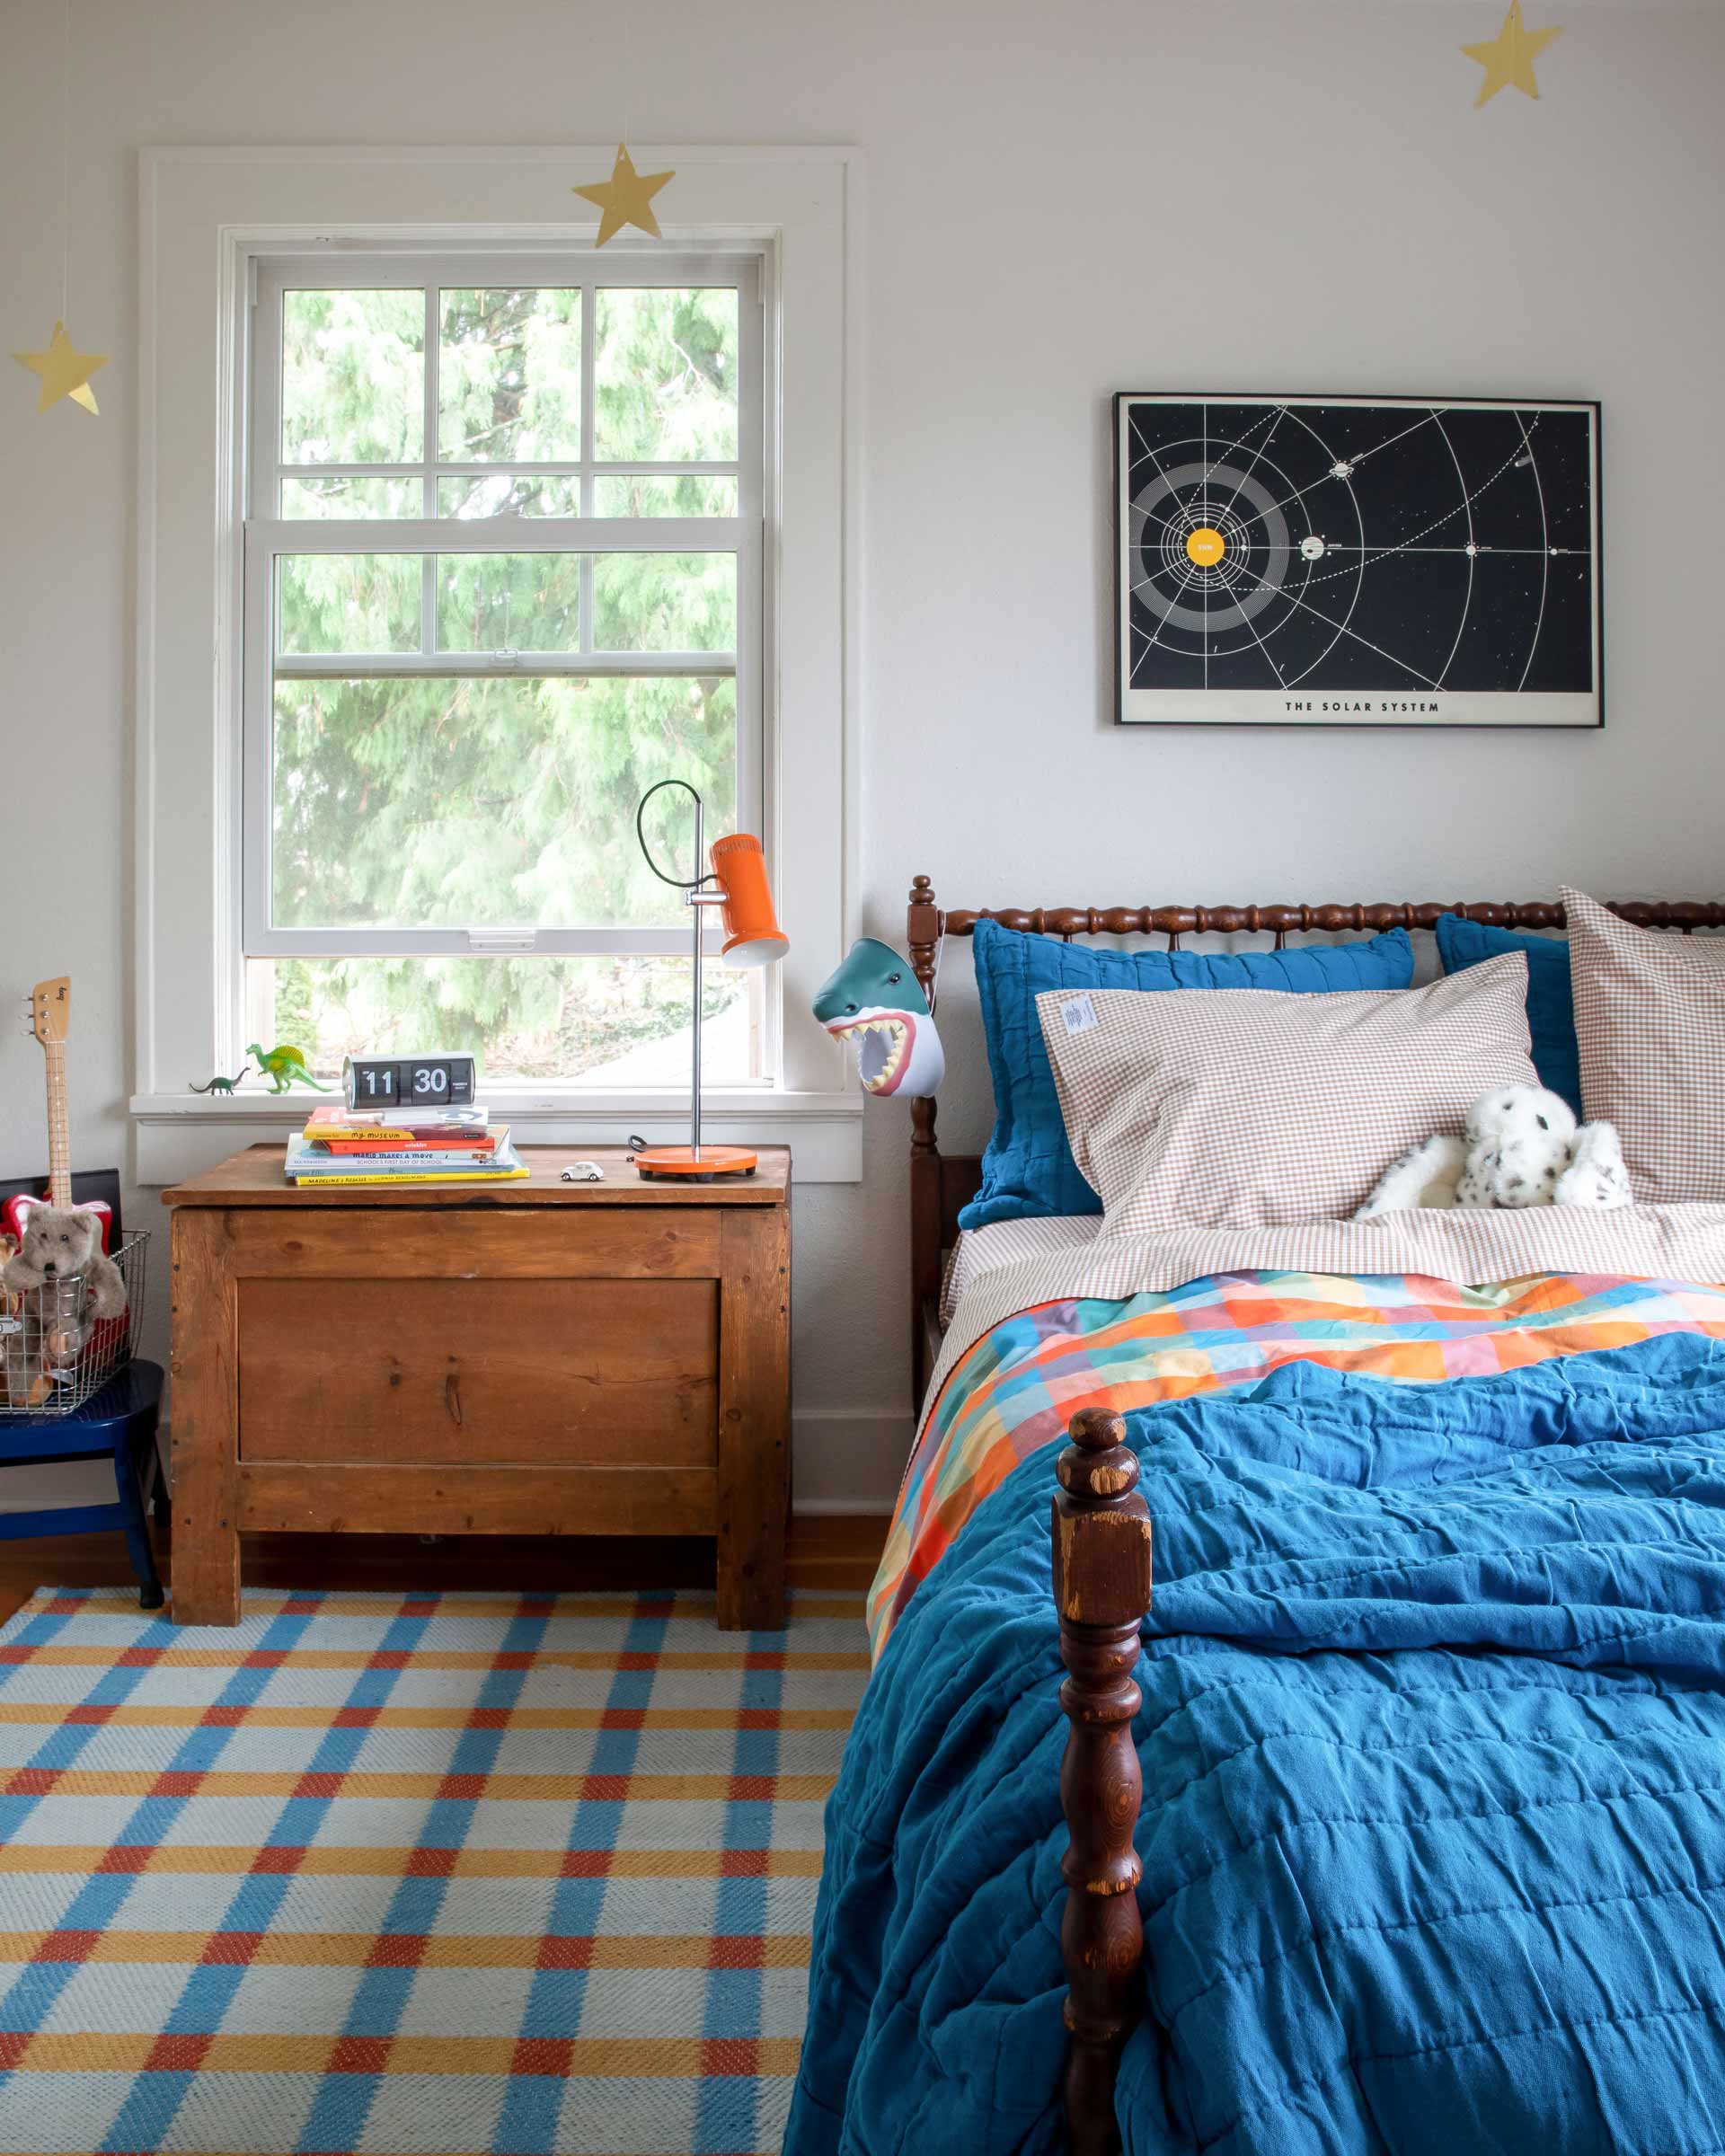 A colorful kid's bedroom with a blue quilt and a plaid rug.